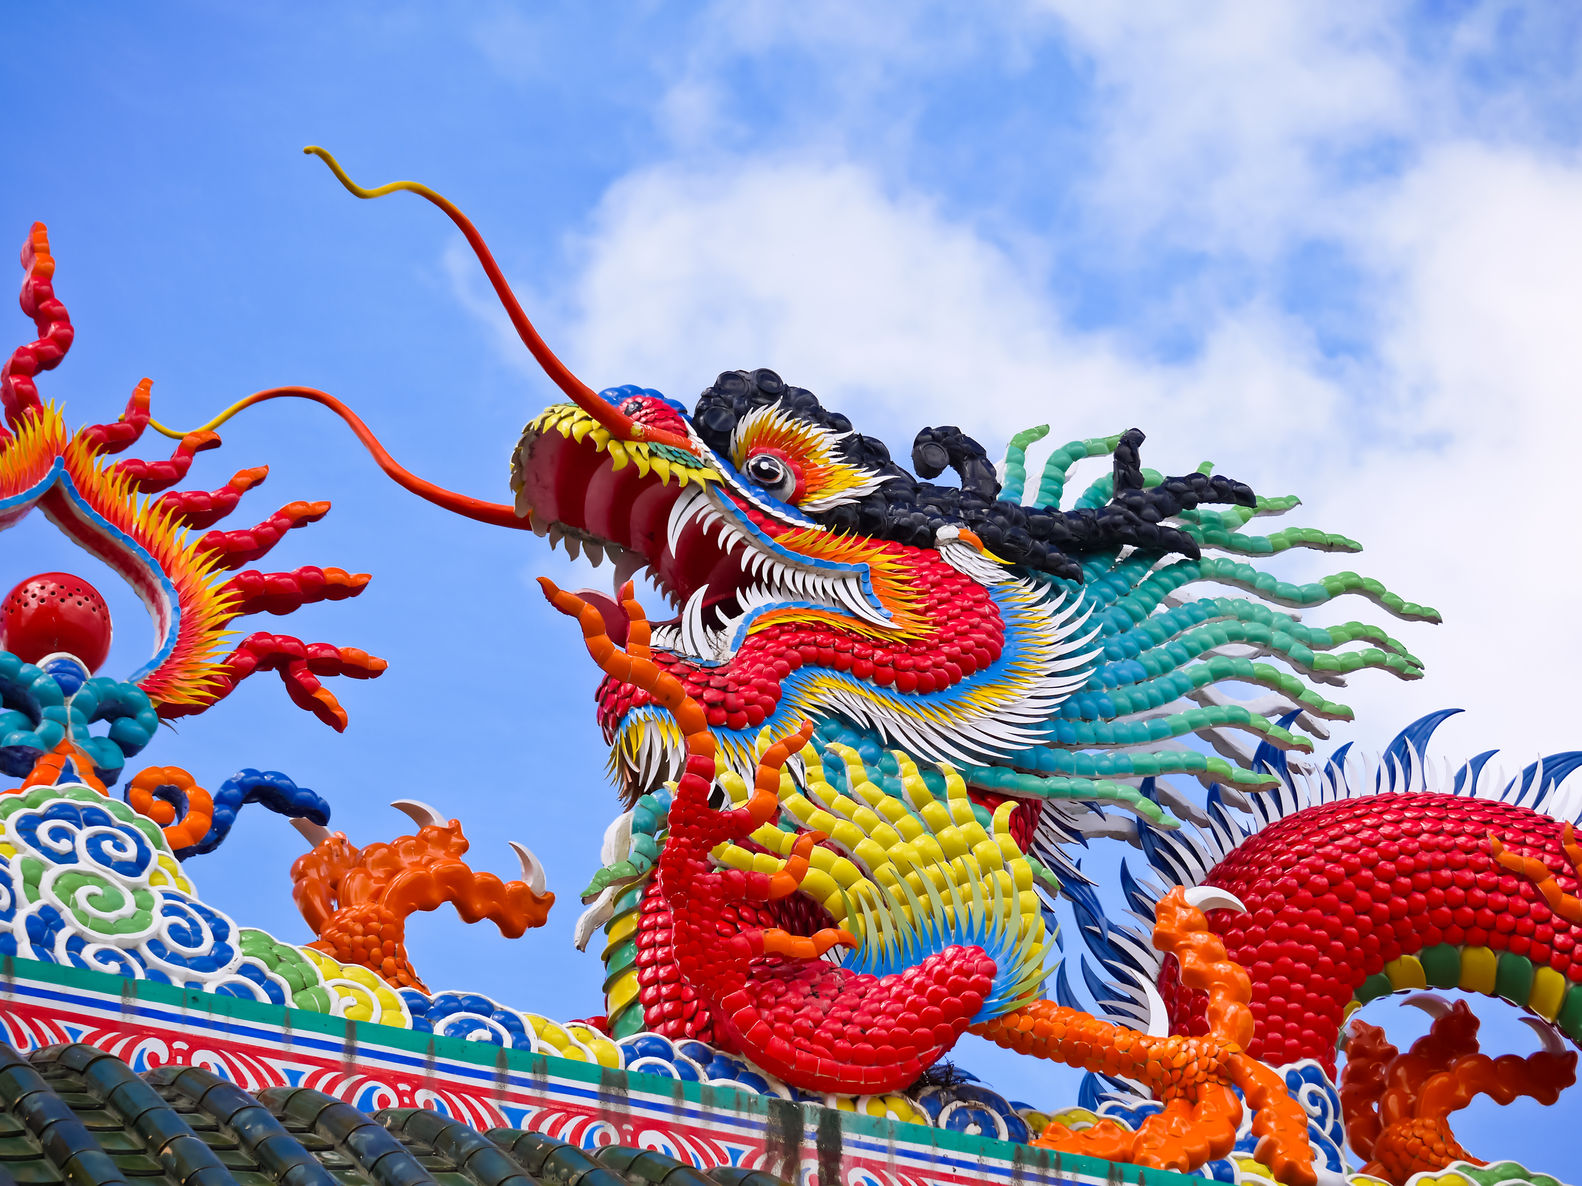 China Cybersecurity Law Update: Two New National And Industry Standards: Personal Information Specification And Personal Financial Information Specification, Officially Published!